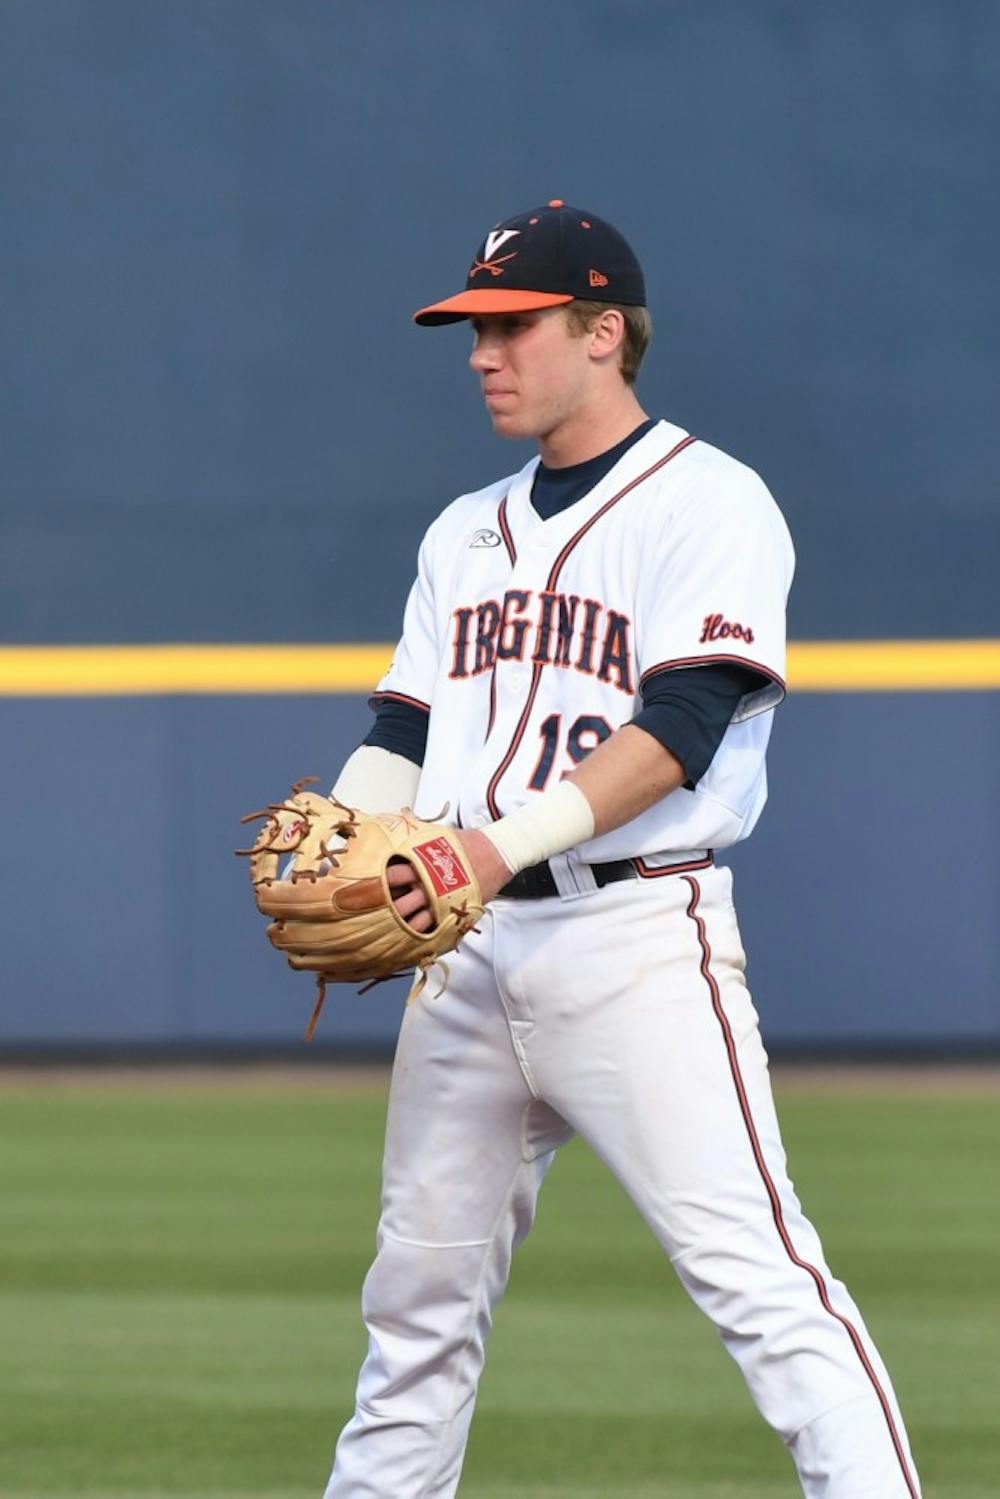 <p>Virginia baseball will need strong performances from underclassmen like sophomore infielder Andy Weber if they want to take down highly ranked Louisville this weekend.</p>